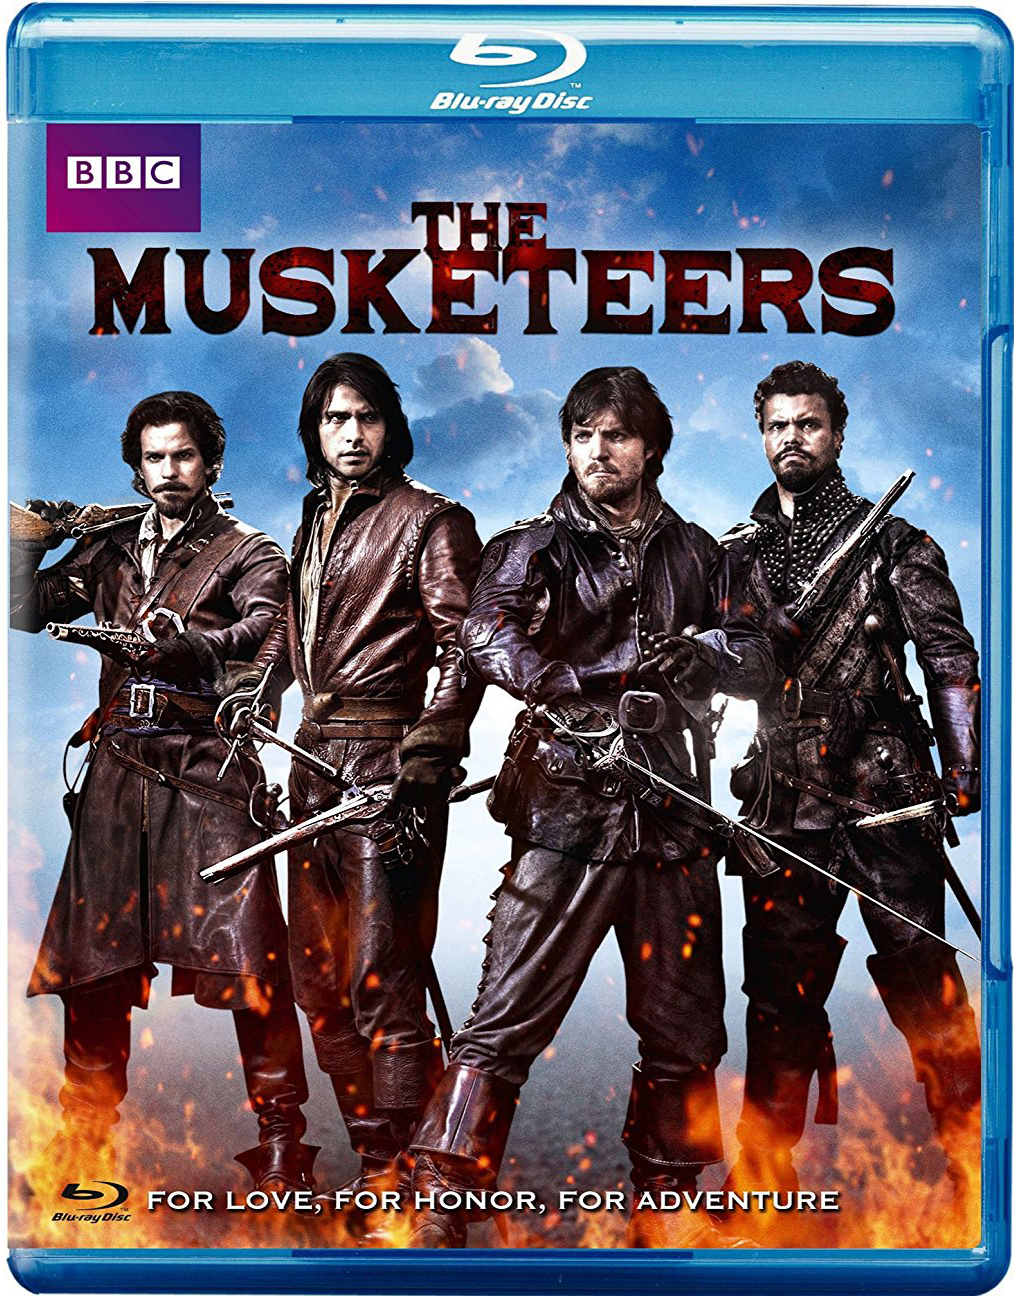 Musketeers, The